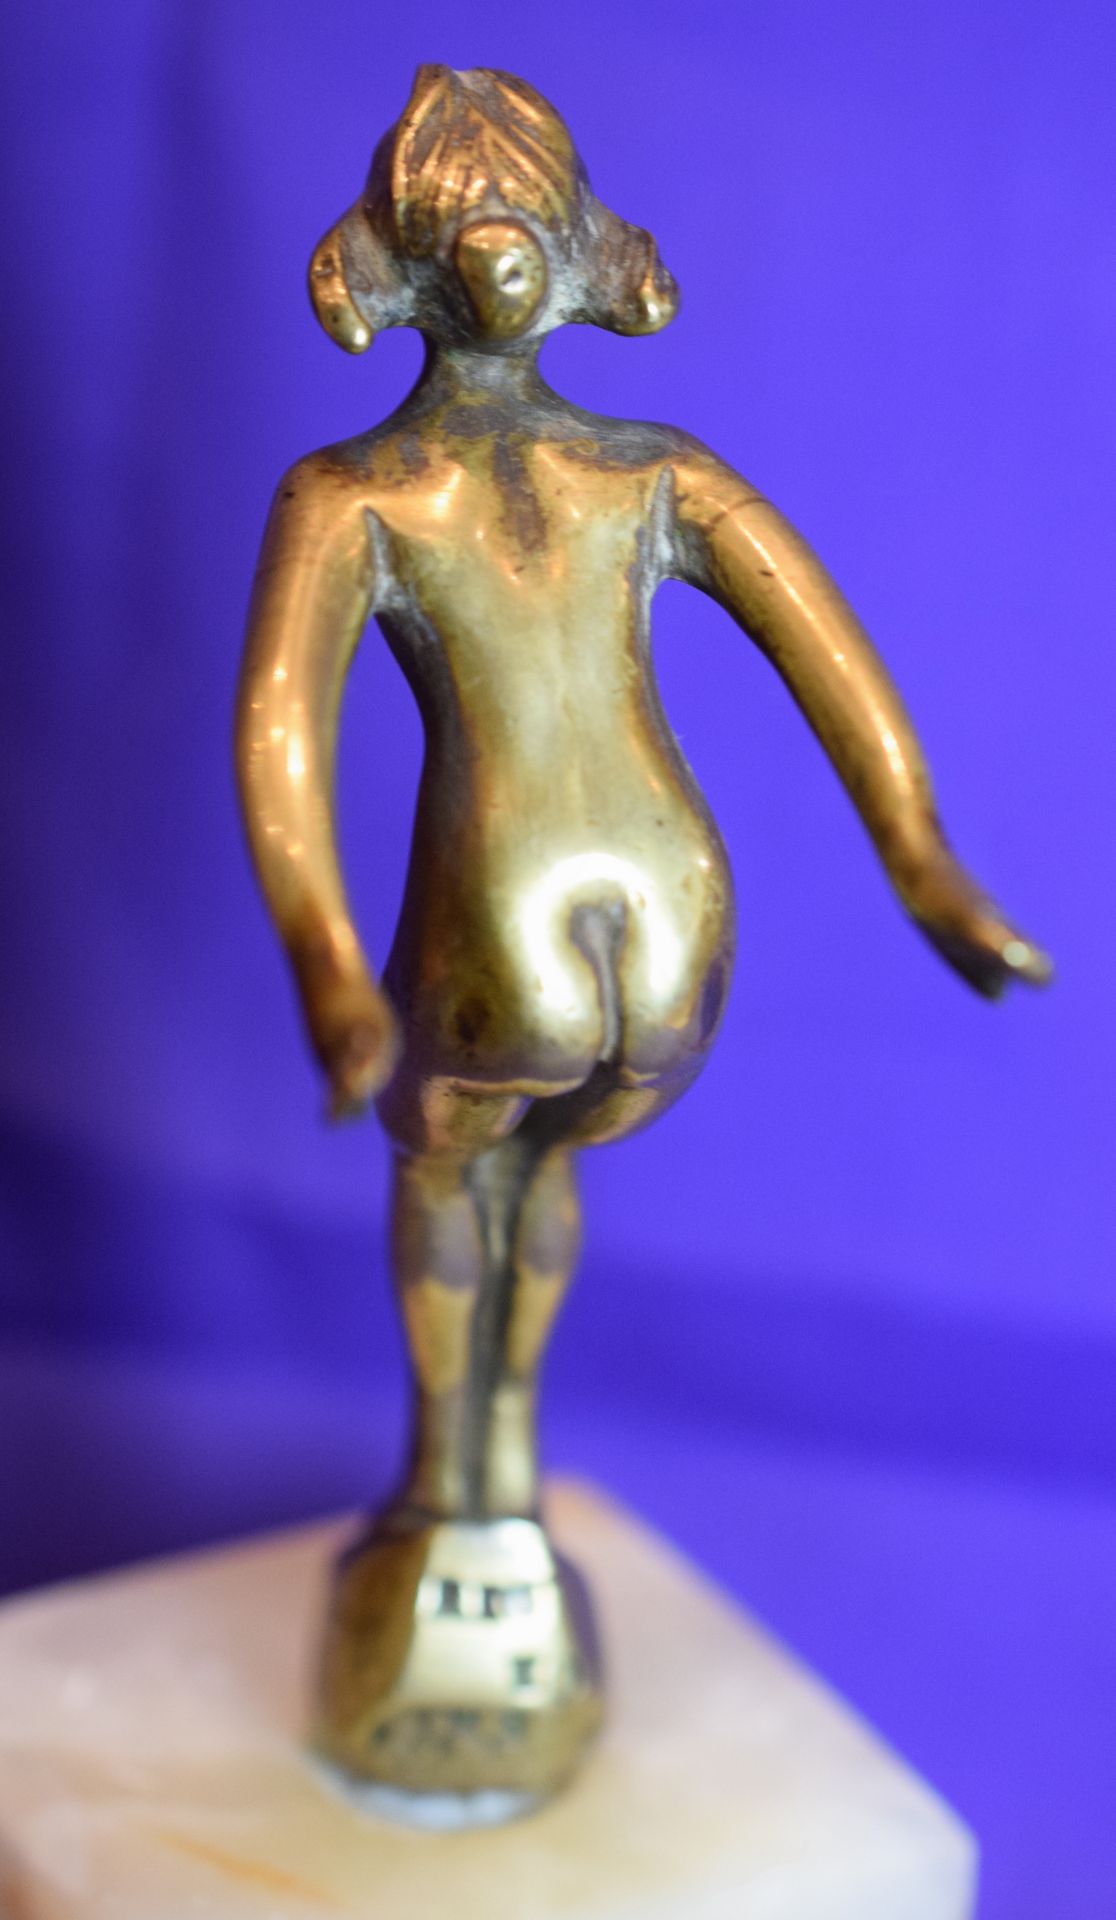 Speed Nymph Bronze Car Mascot - Image 5 of 6